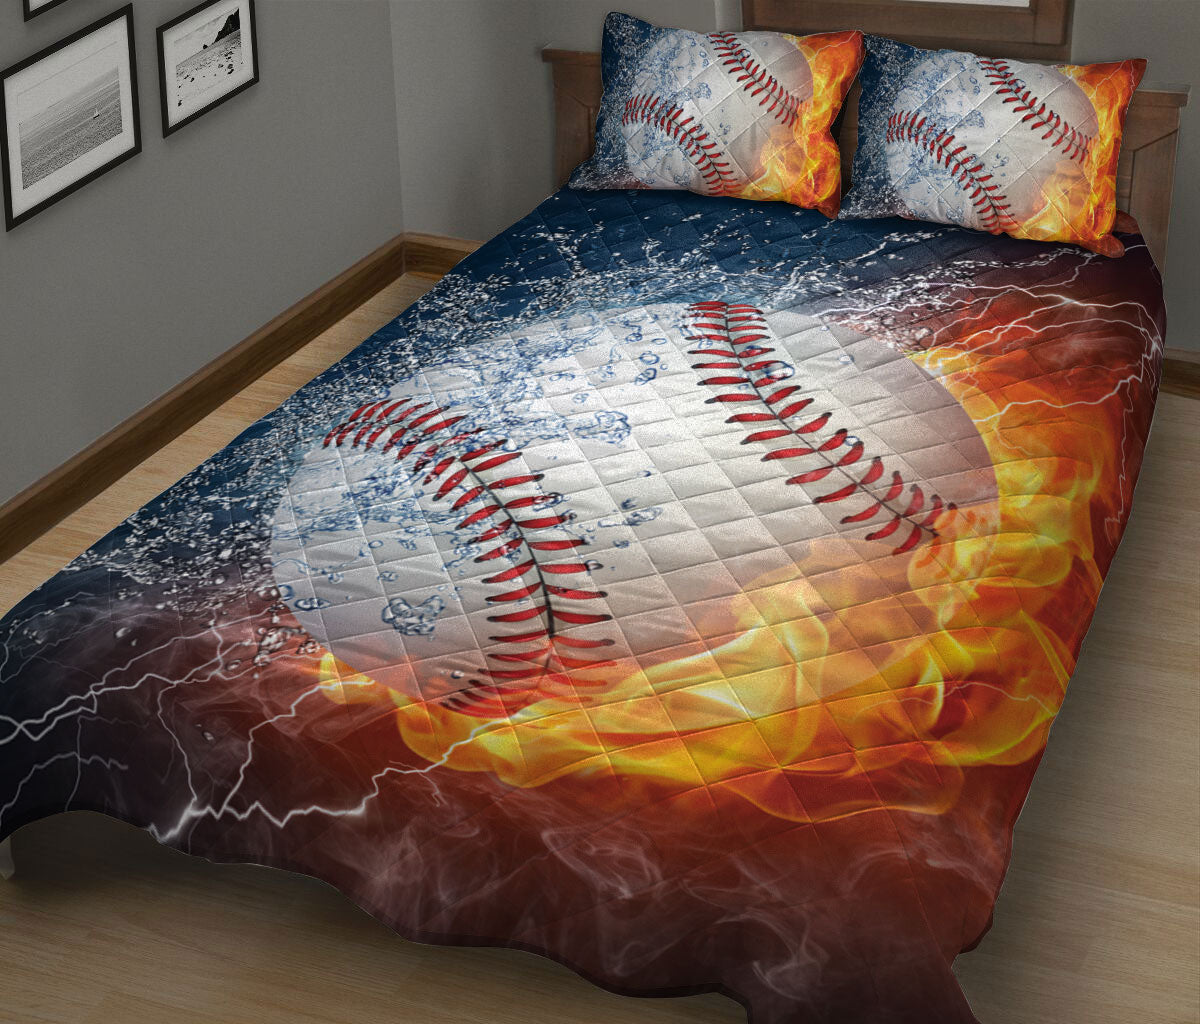 Ohaprints-Quilt-Bed-Set-Pillowcase-Baseball-Ball-Fire-&-Water-Unique-Gift-For-Sports-Lover-Men-Women-Kid-Blanket-Bedspread-Bedding-1427-King (90'' x 100'')